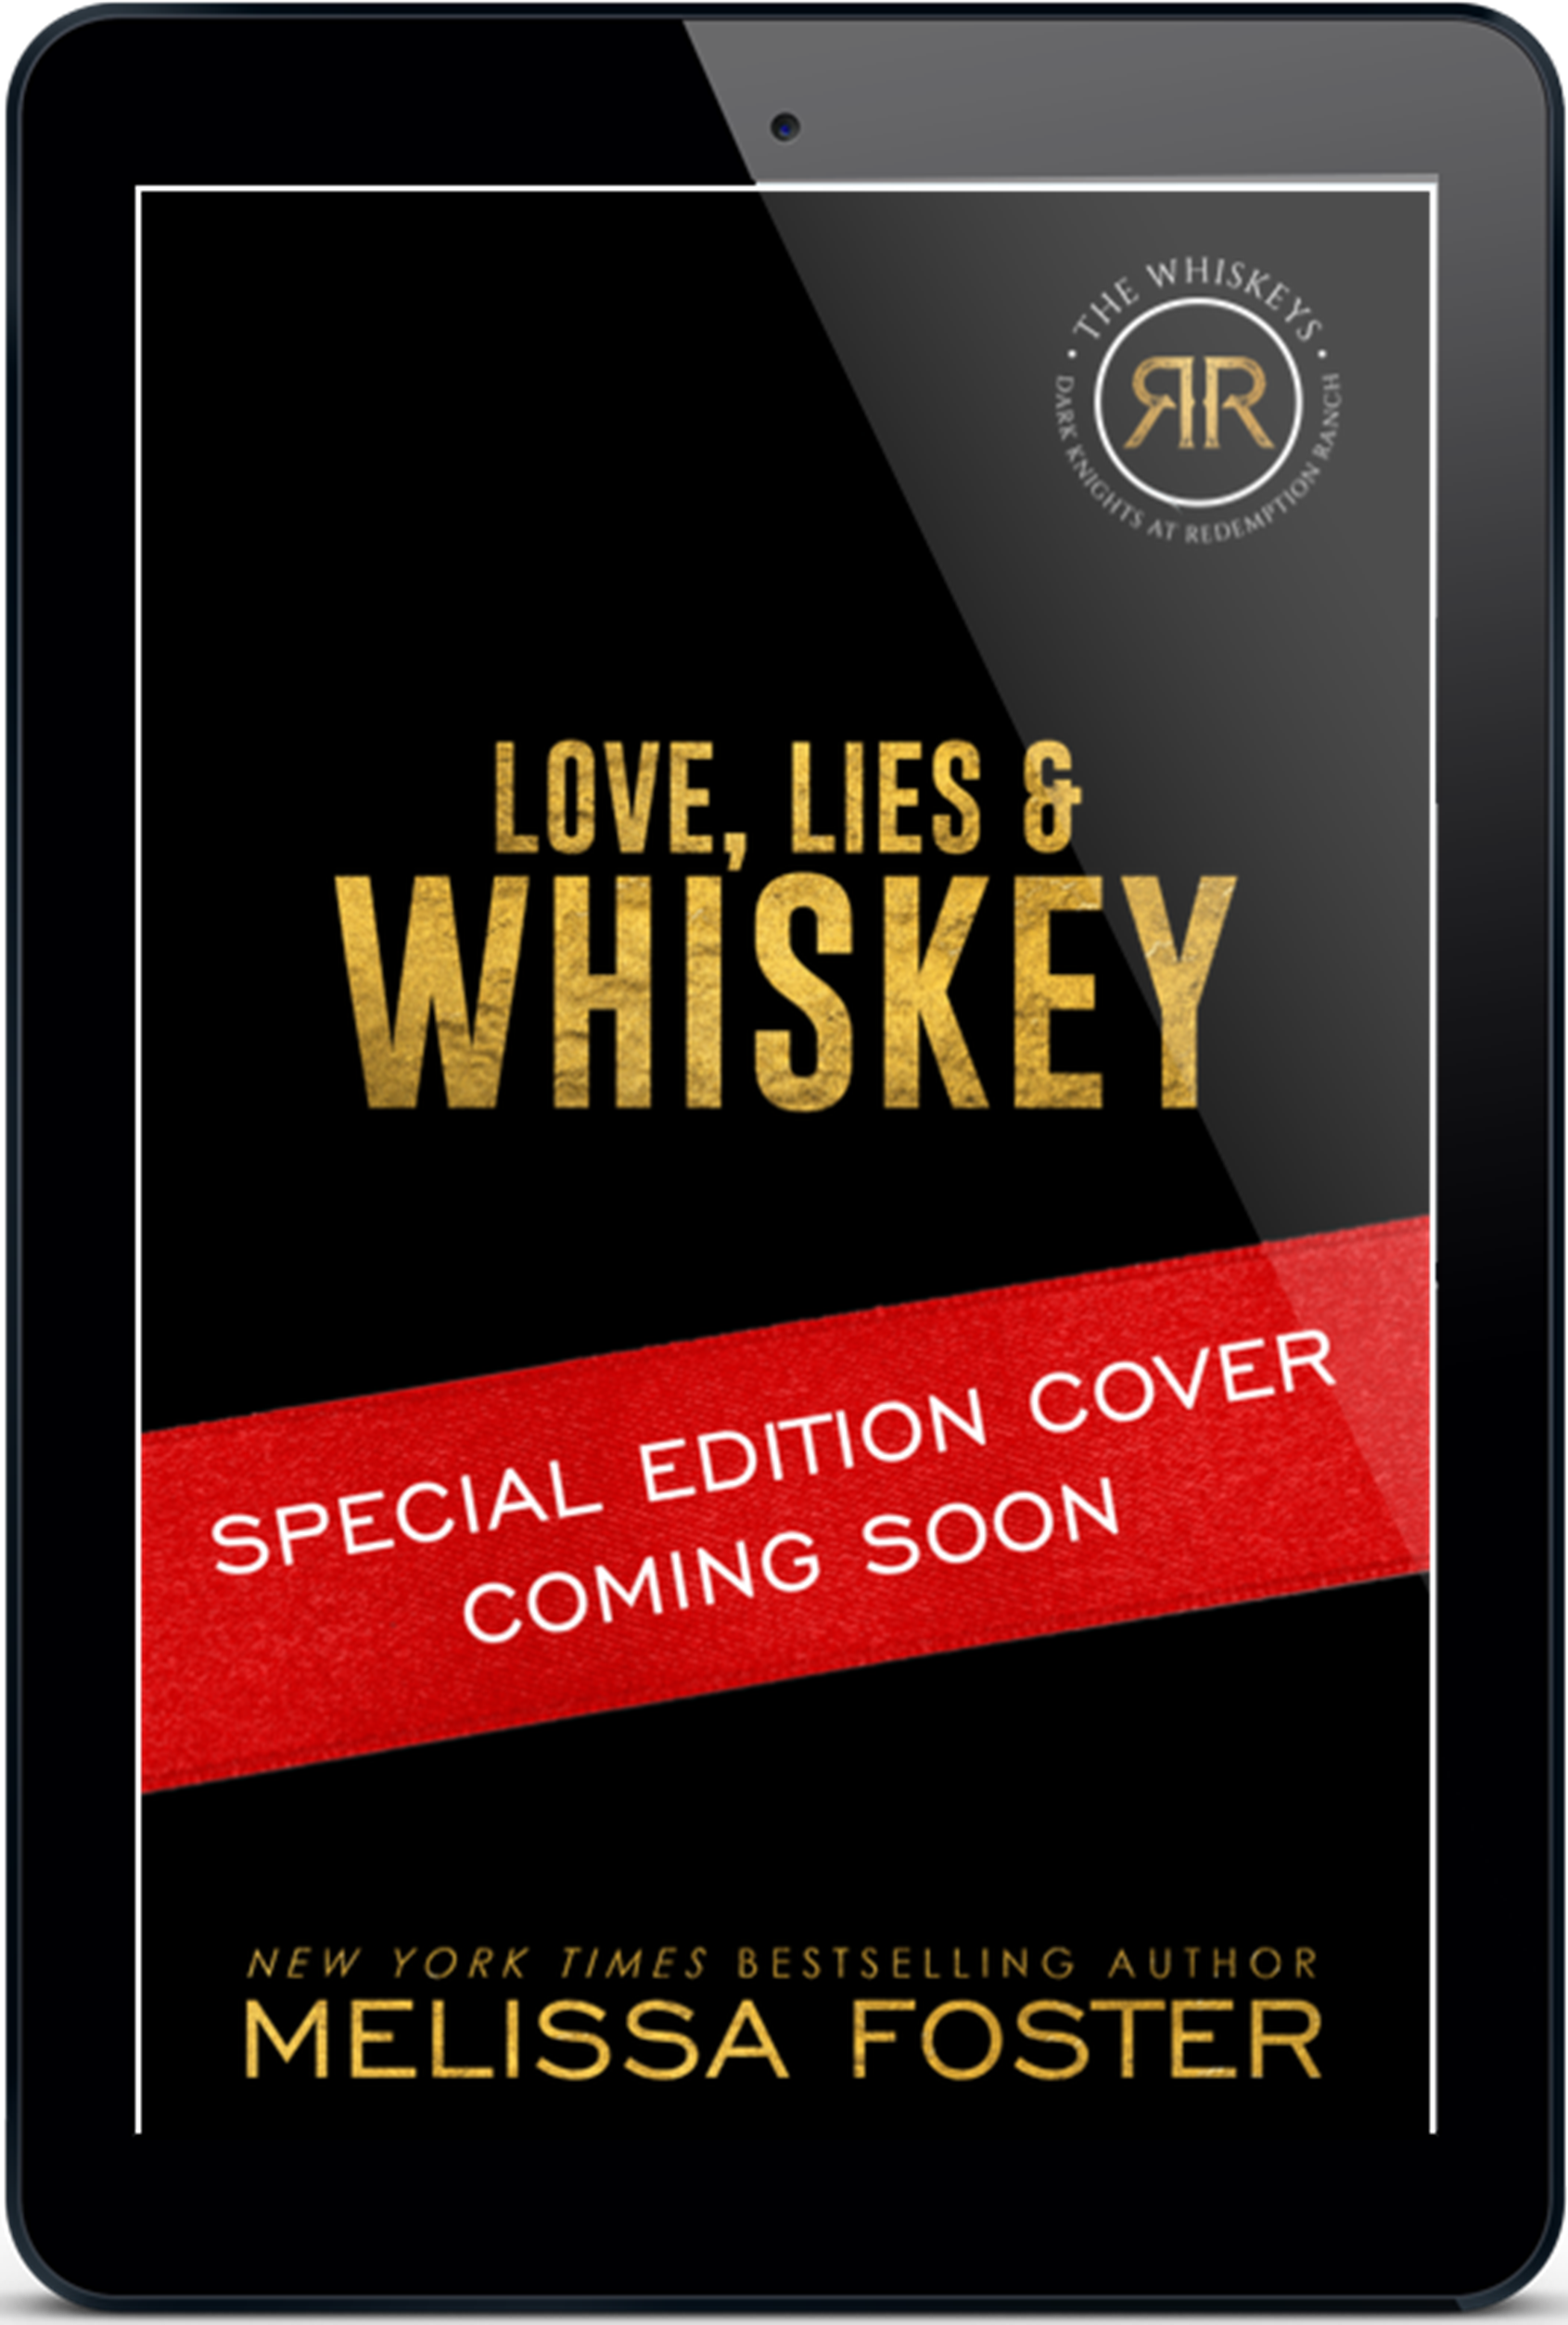 Love, Lies & Whiskey Special Edition by Melissa Foster